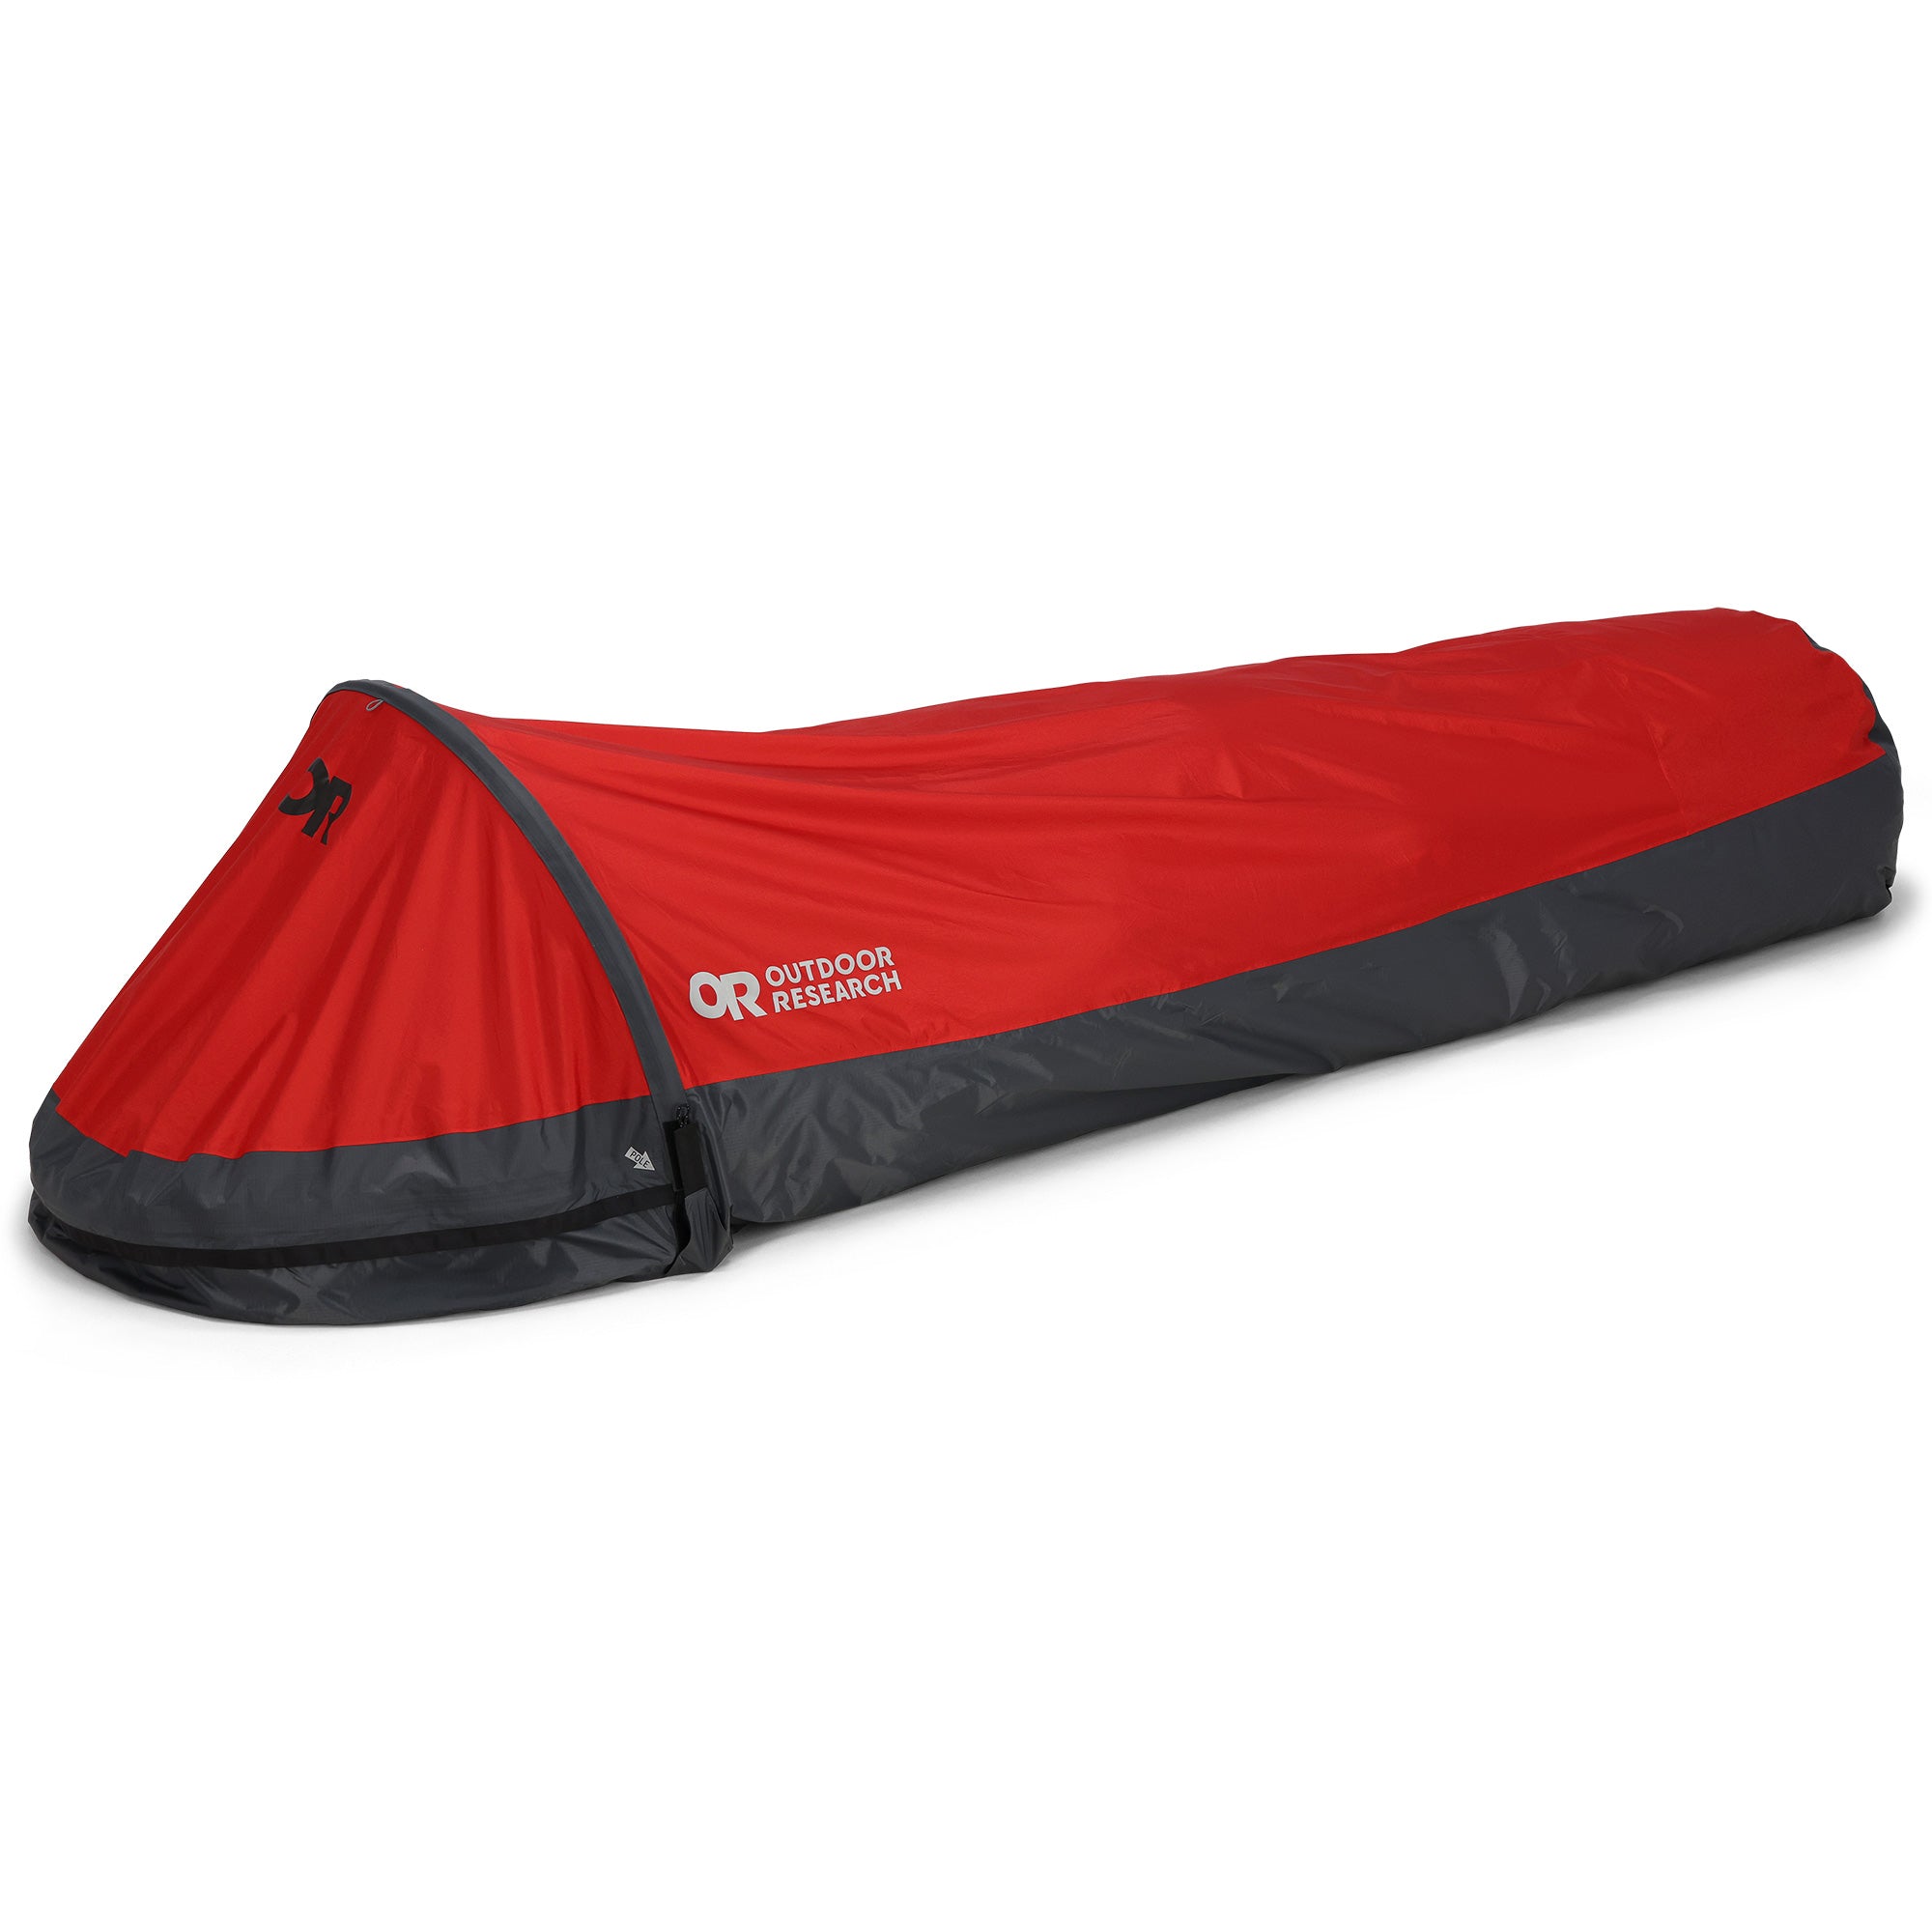 Outdoor Research Helium Bivy in cranberry red